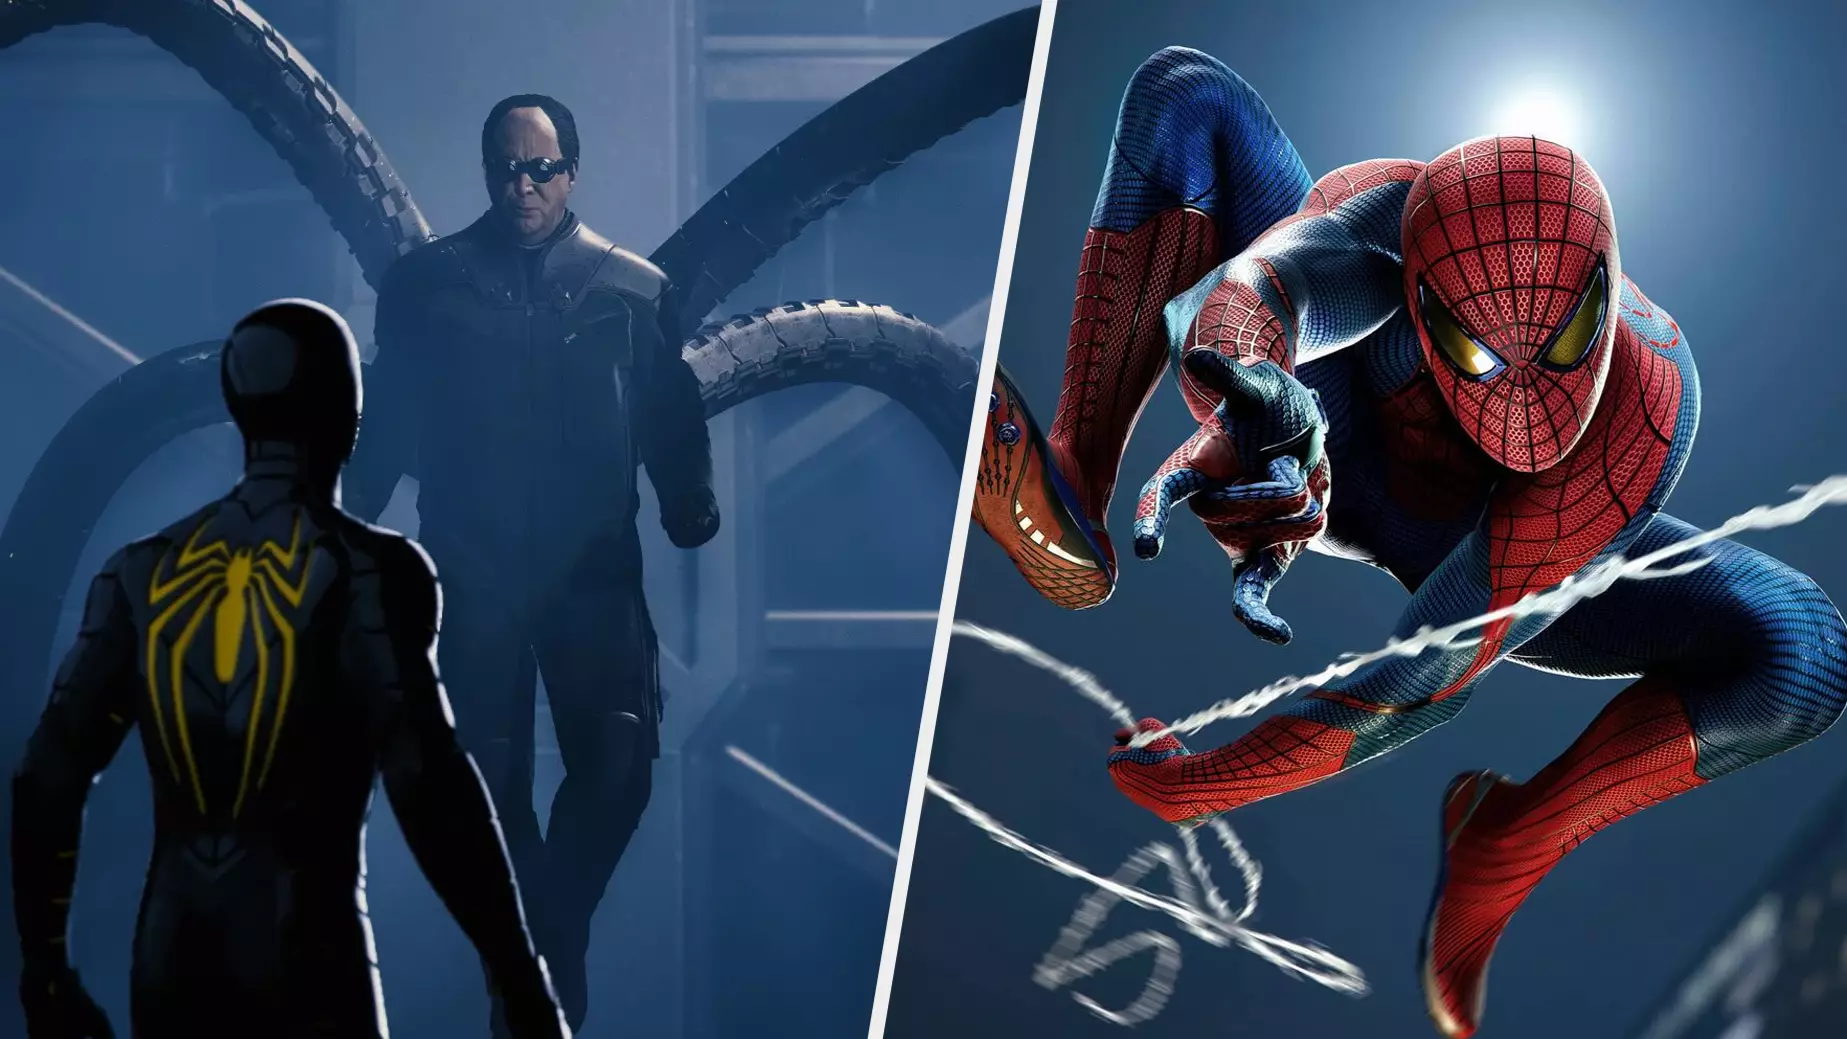 'Marvel's Spider-Man' Has Sold Over 20 Million Units, Exec Claims